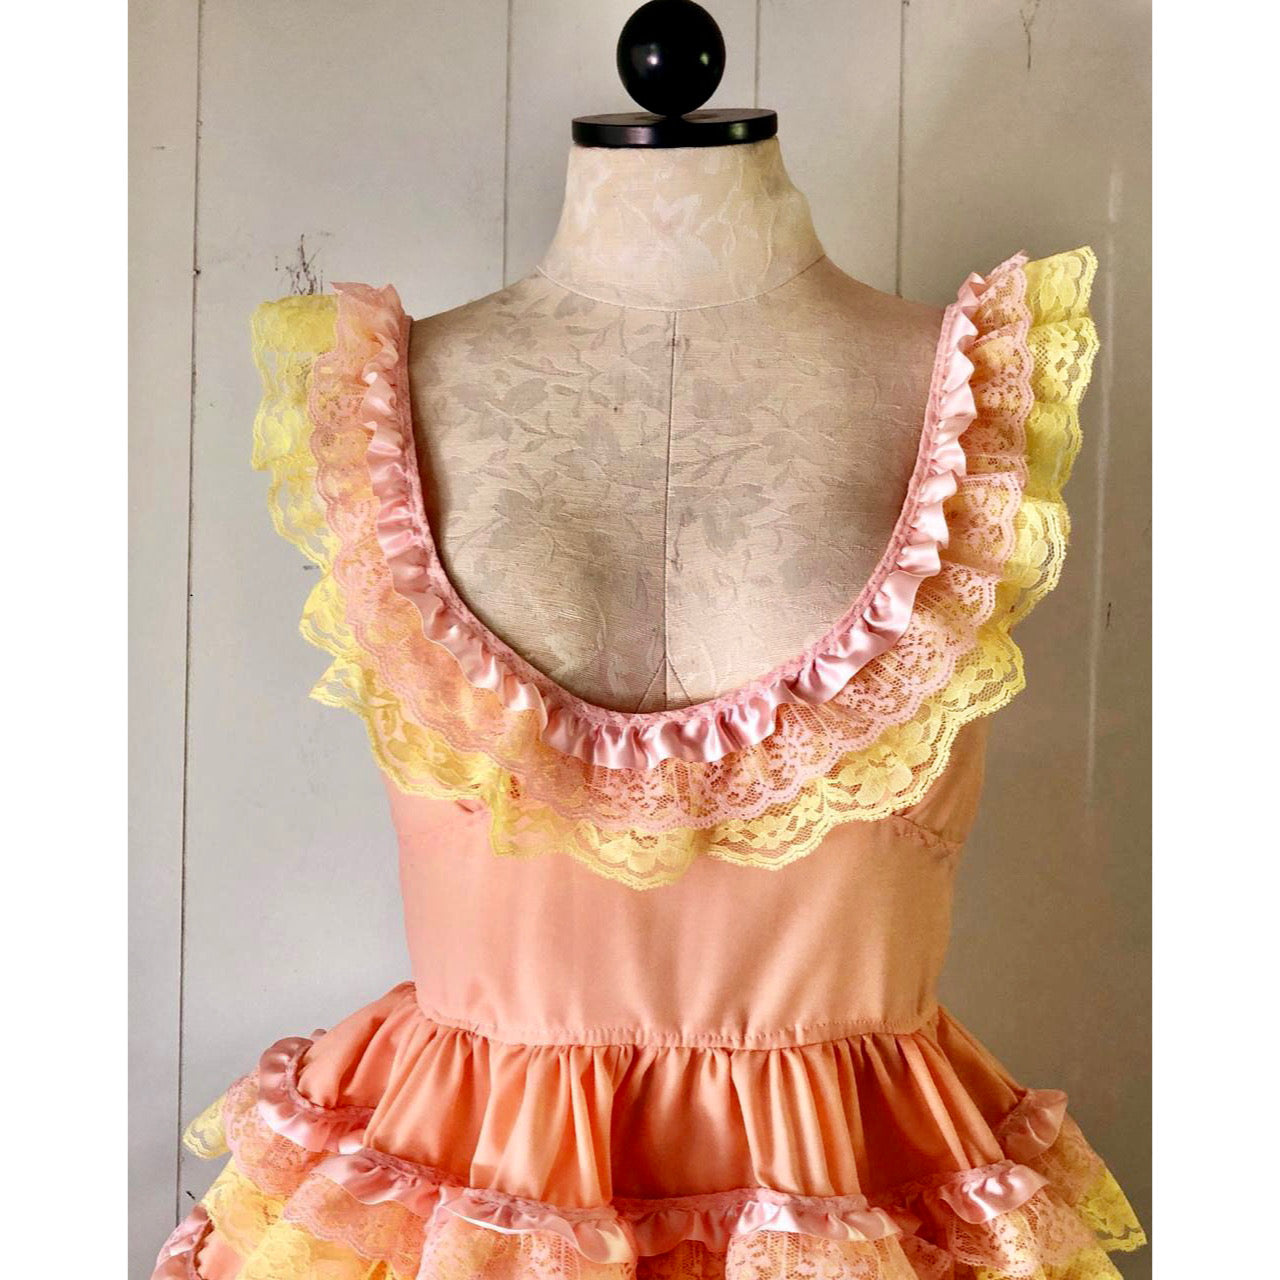 The Sleeveless Cupcake Dress in Peach and Yellow